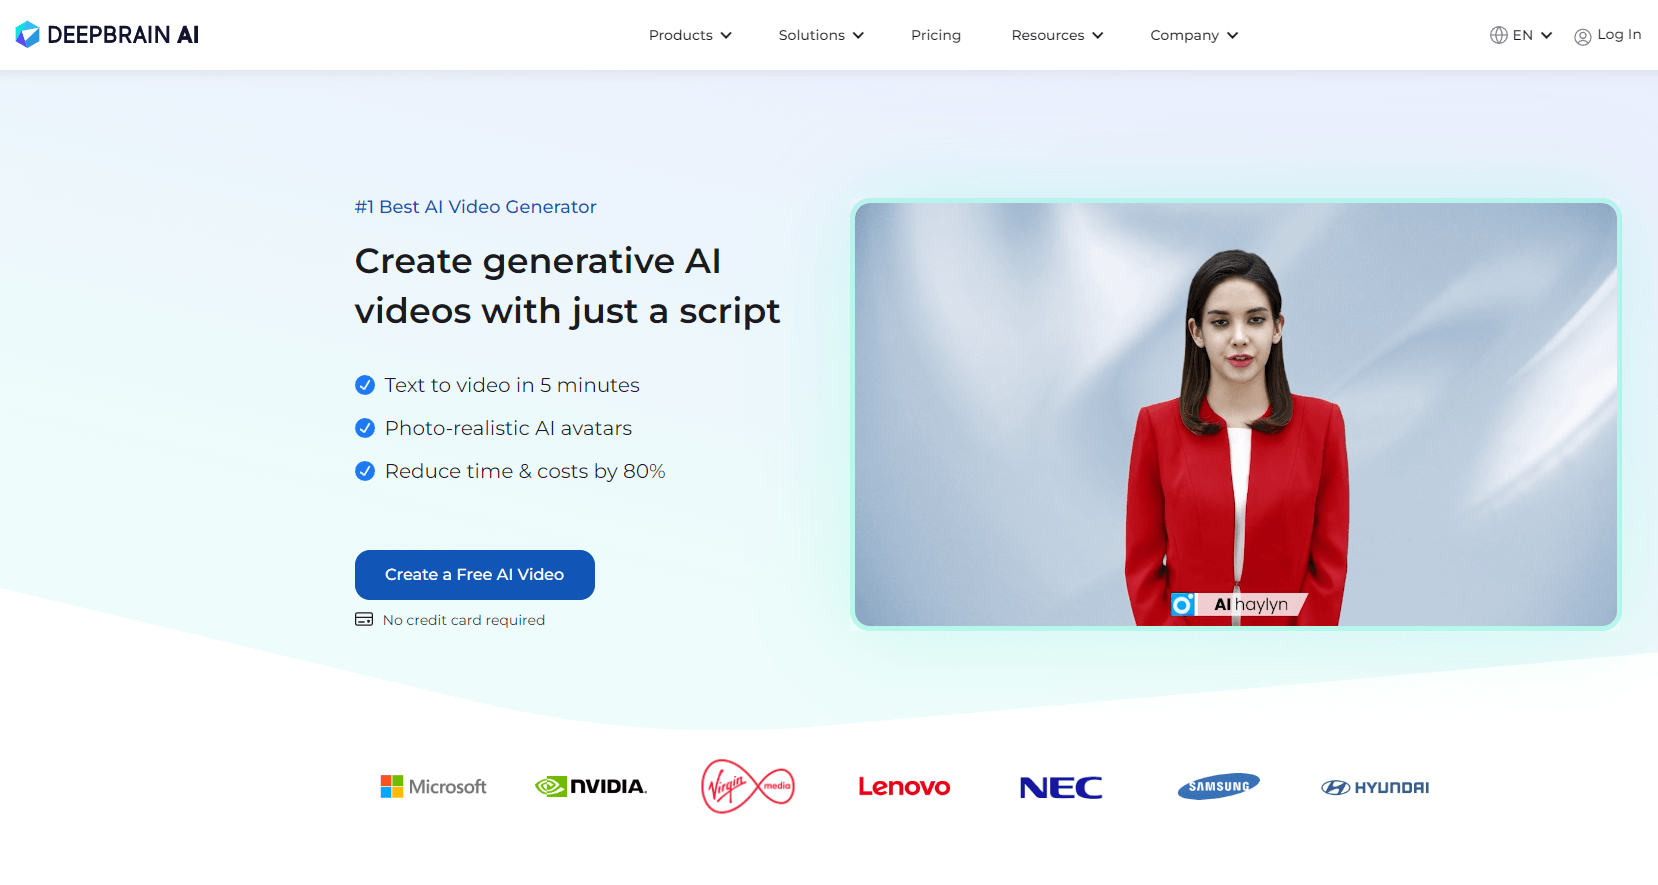 DeepBrain’s homepage showing how to create avatar based videos